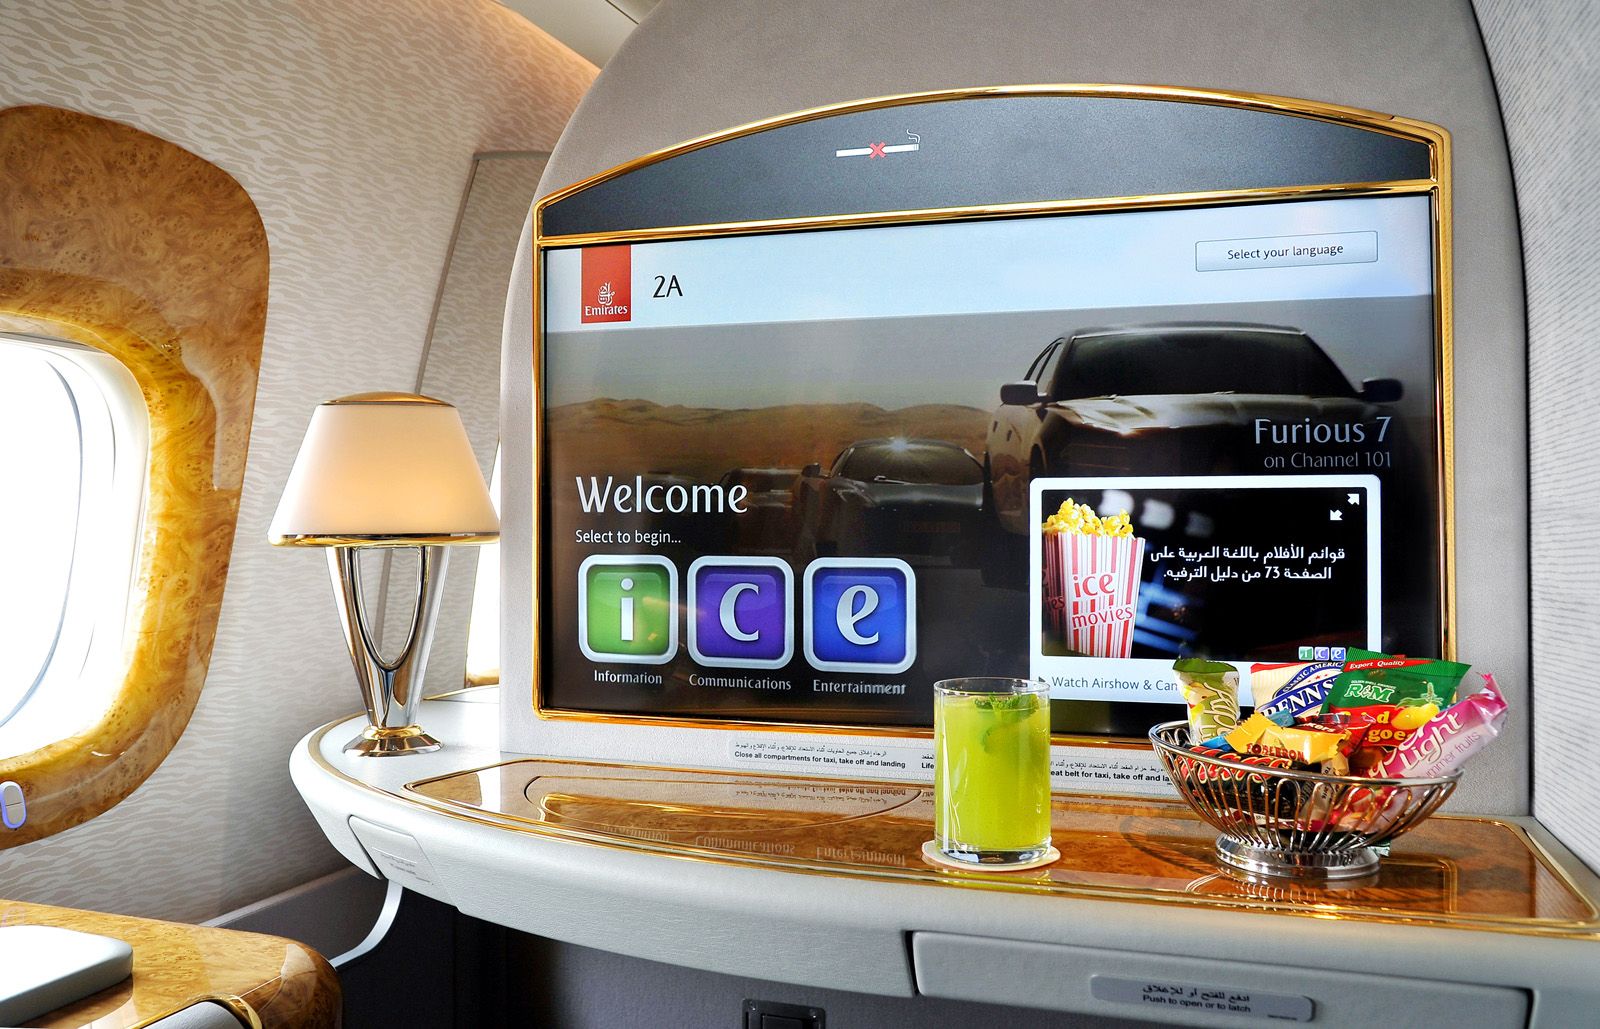 wow emirates first class passengers get 32 inch screens but don t worry economy gets bigger screens too image 1